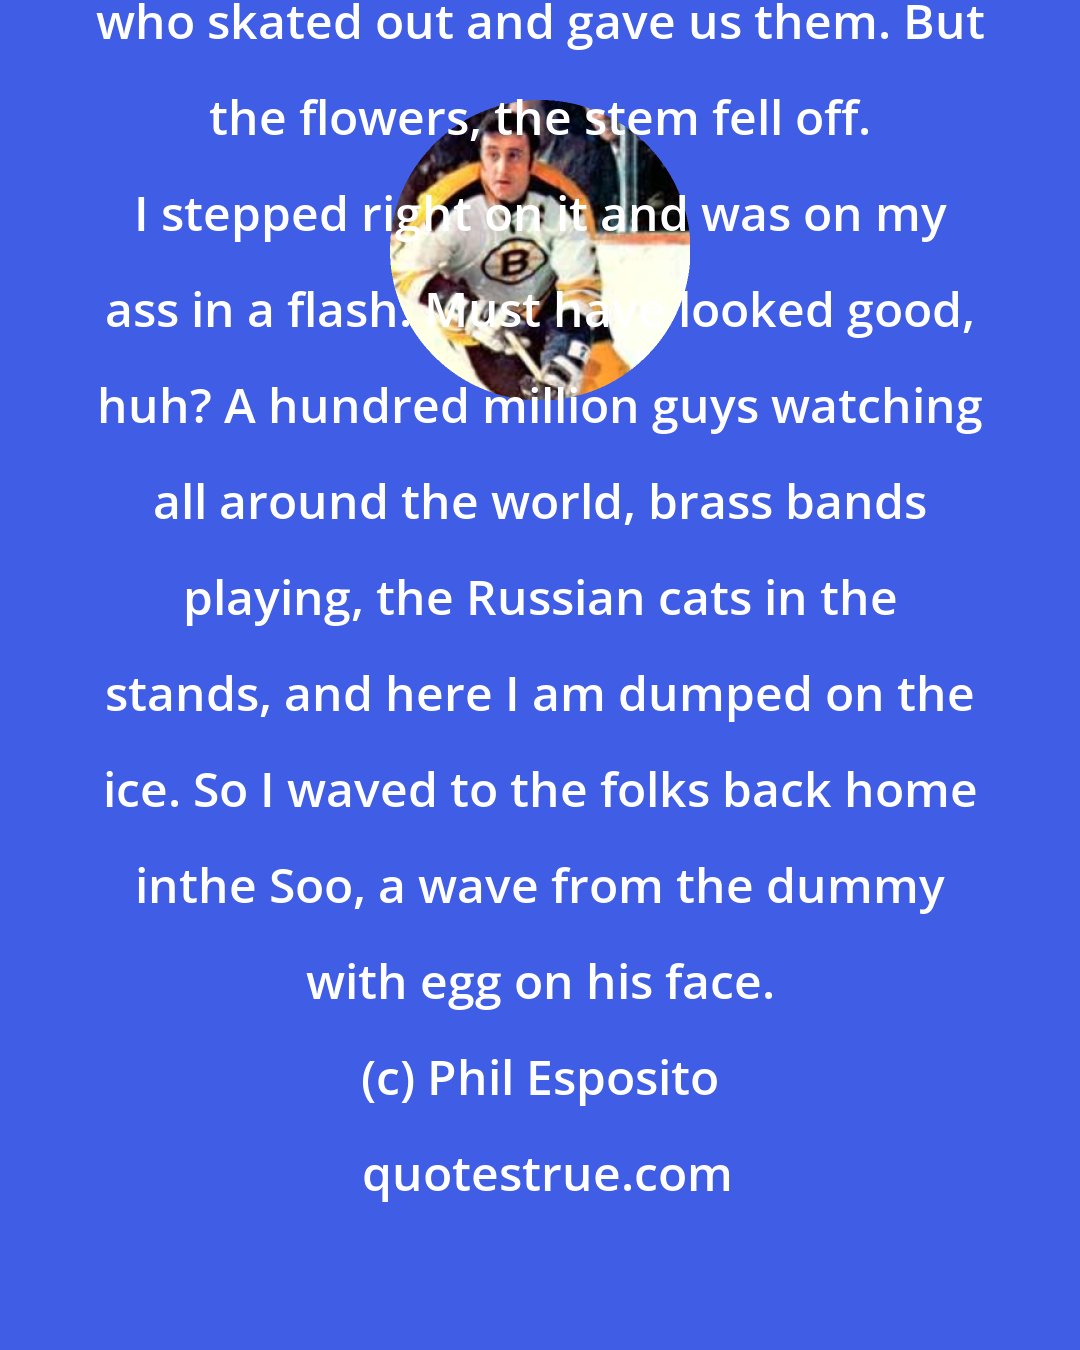 Phil Esposito: Damn flowers. Nice kids, the ones who skated out and gave us them. But the flowers, the stem fell off. I stepped right on it and was on my ass in a flash. Must have looked good, huh? A hundred million guys watching all around the world, brass bands playing, the Russian cats in the stands, and here I am dumped on the ice. So I waved to the folks back home inthe Soo, a wave from the dummy with egg on his face.